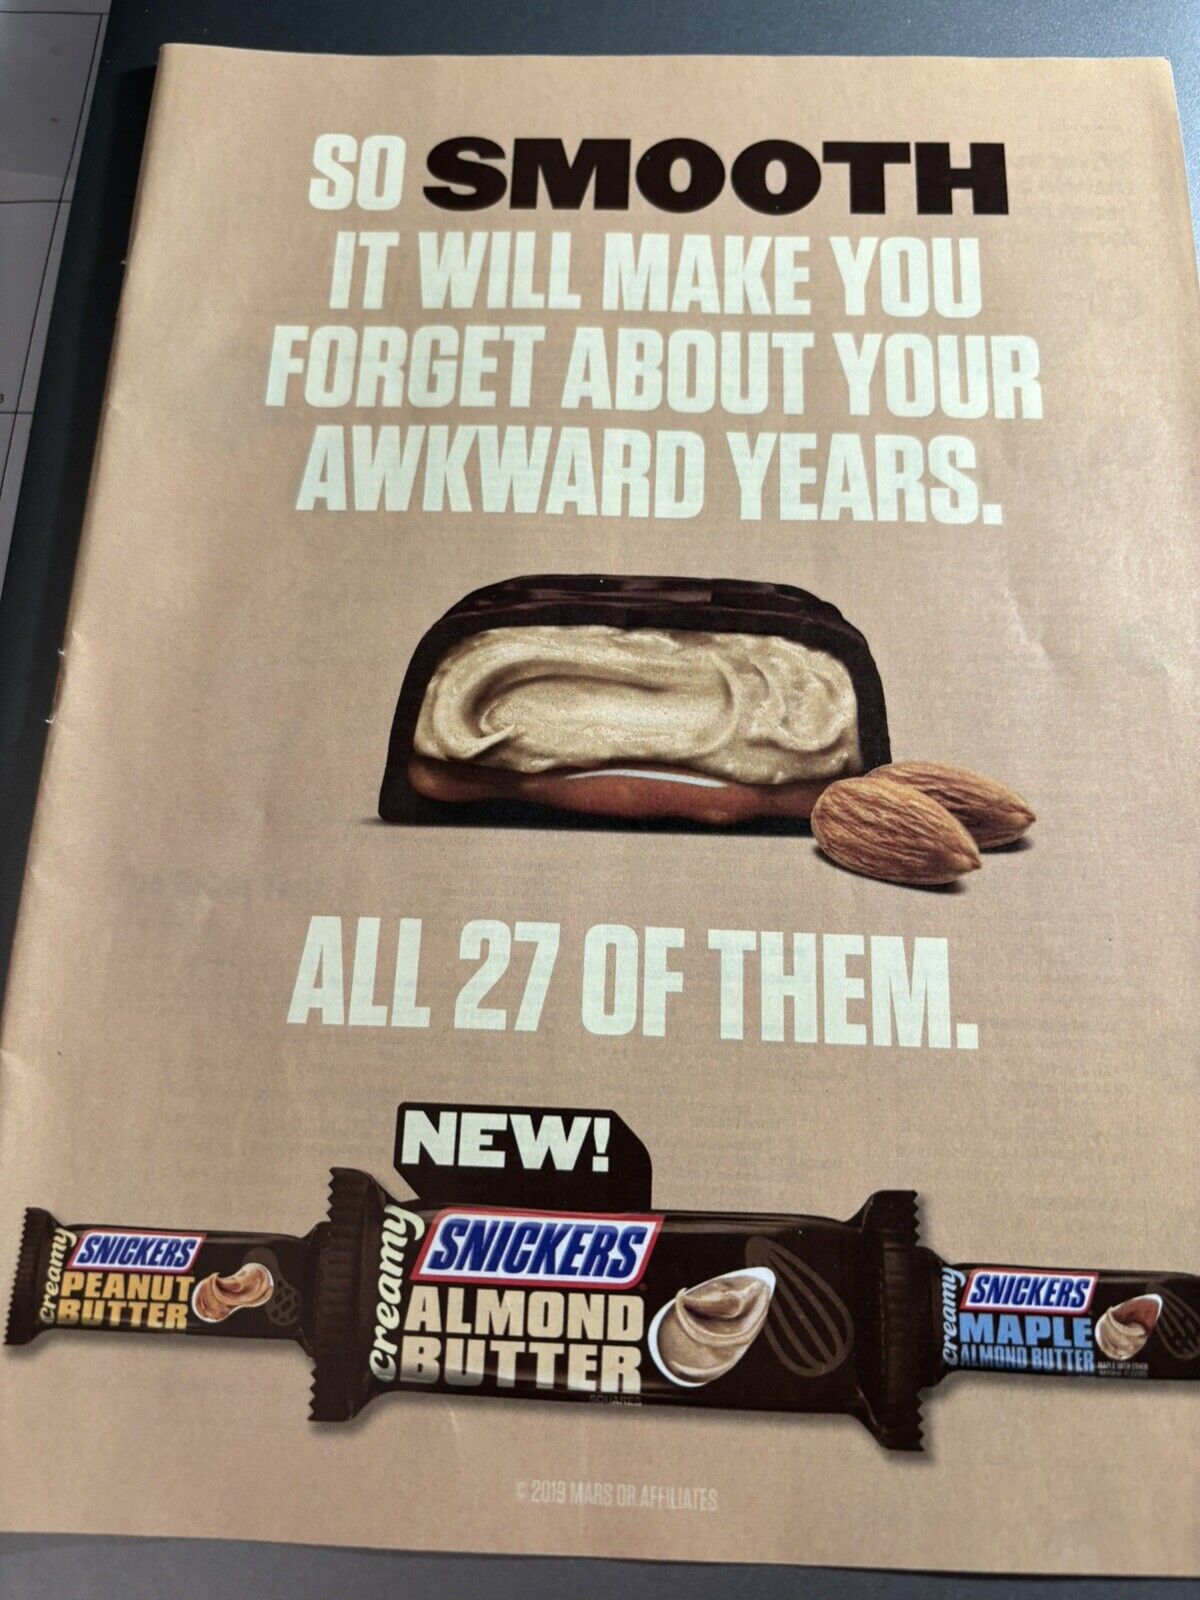 2019 Funny Ad For Snickers Almond Butter 8 X 11 Dimensions 